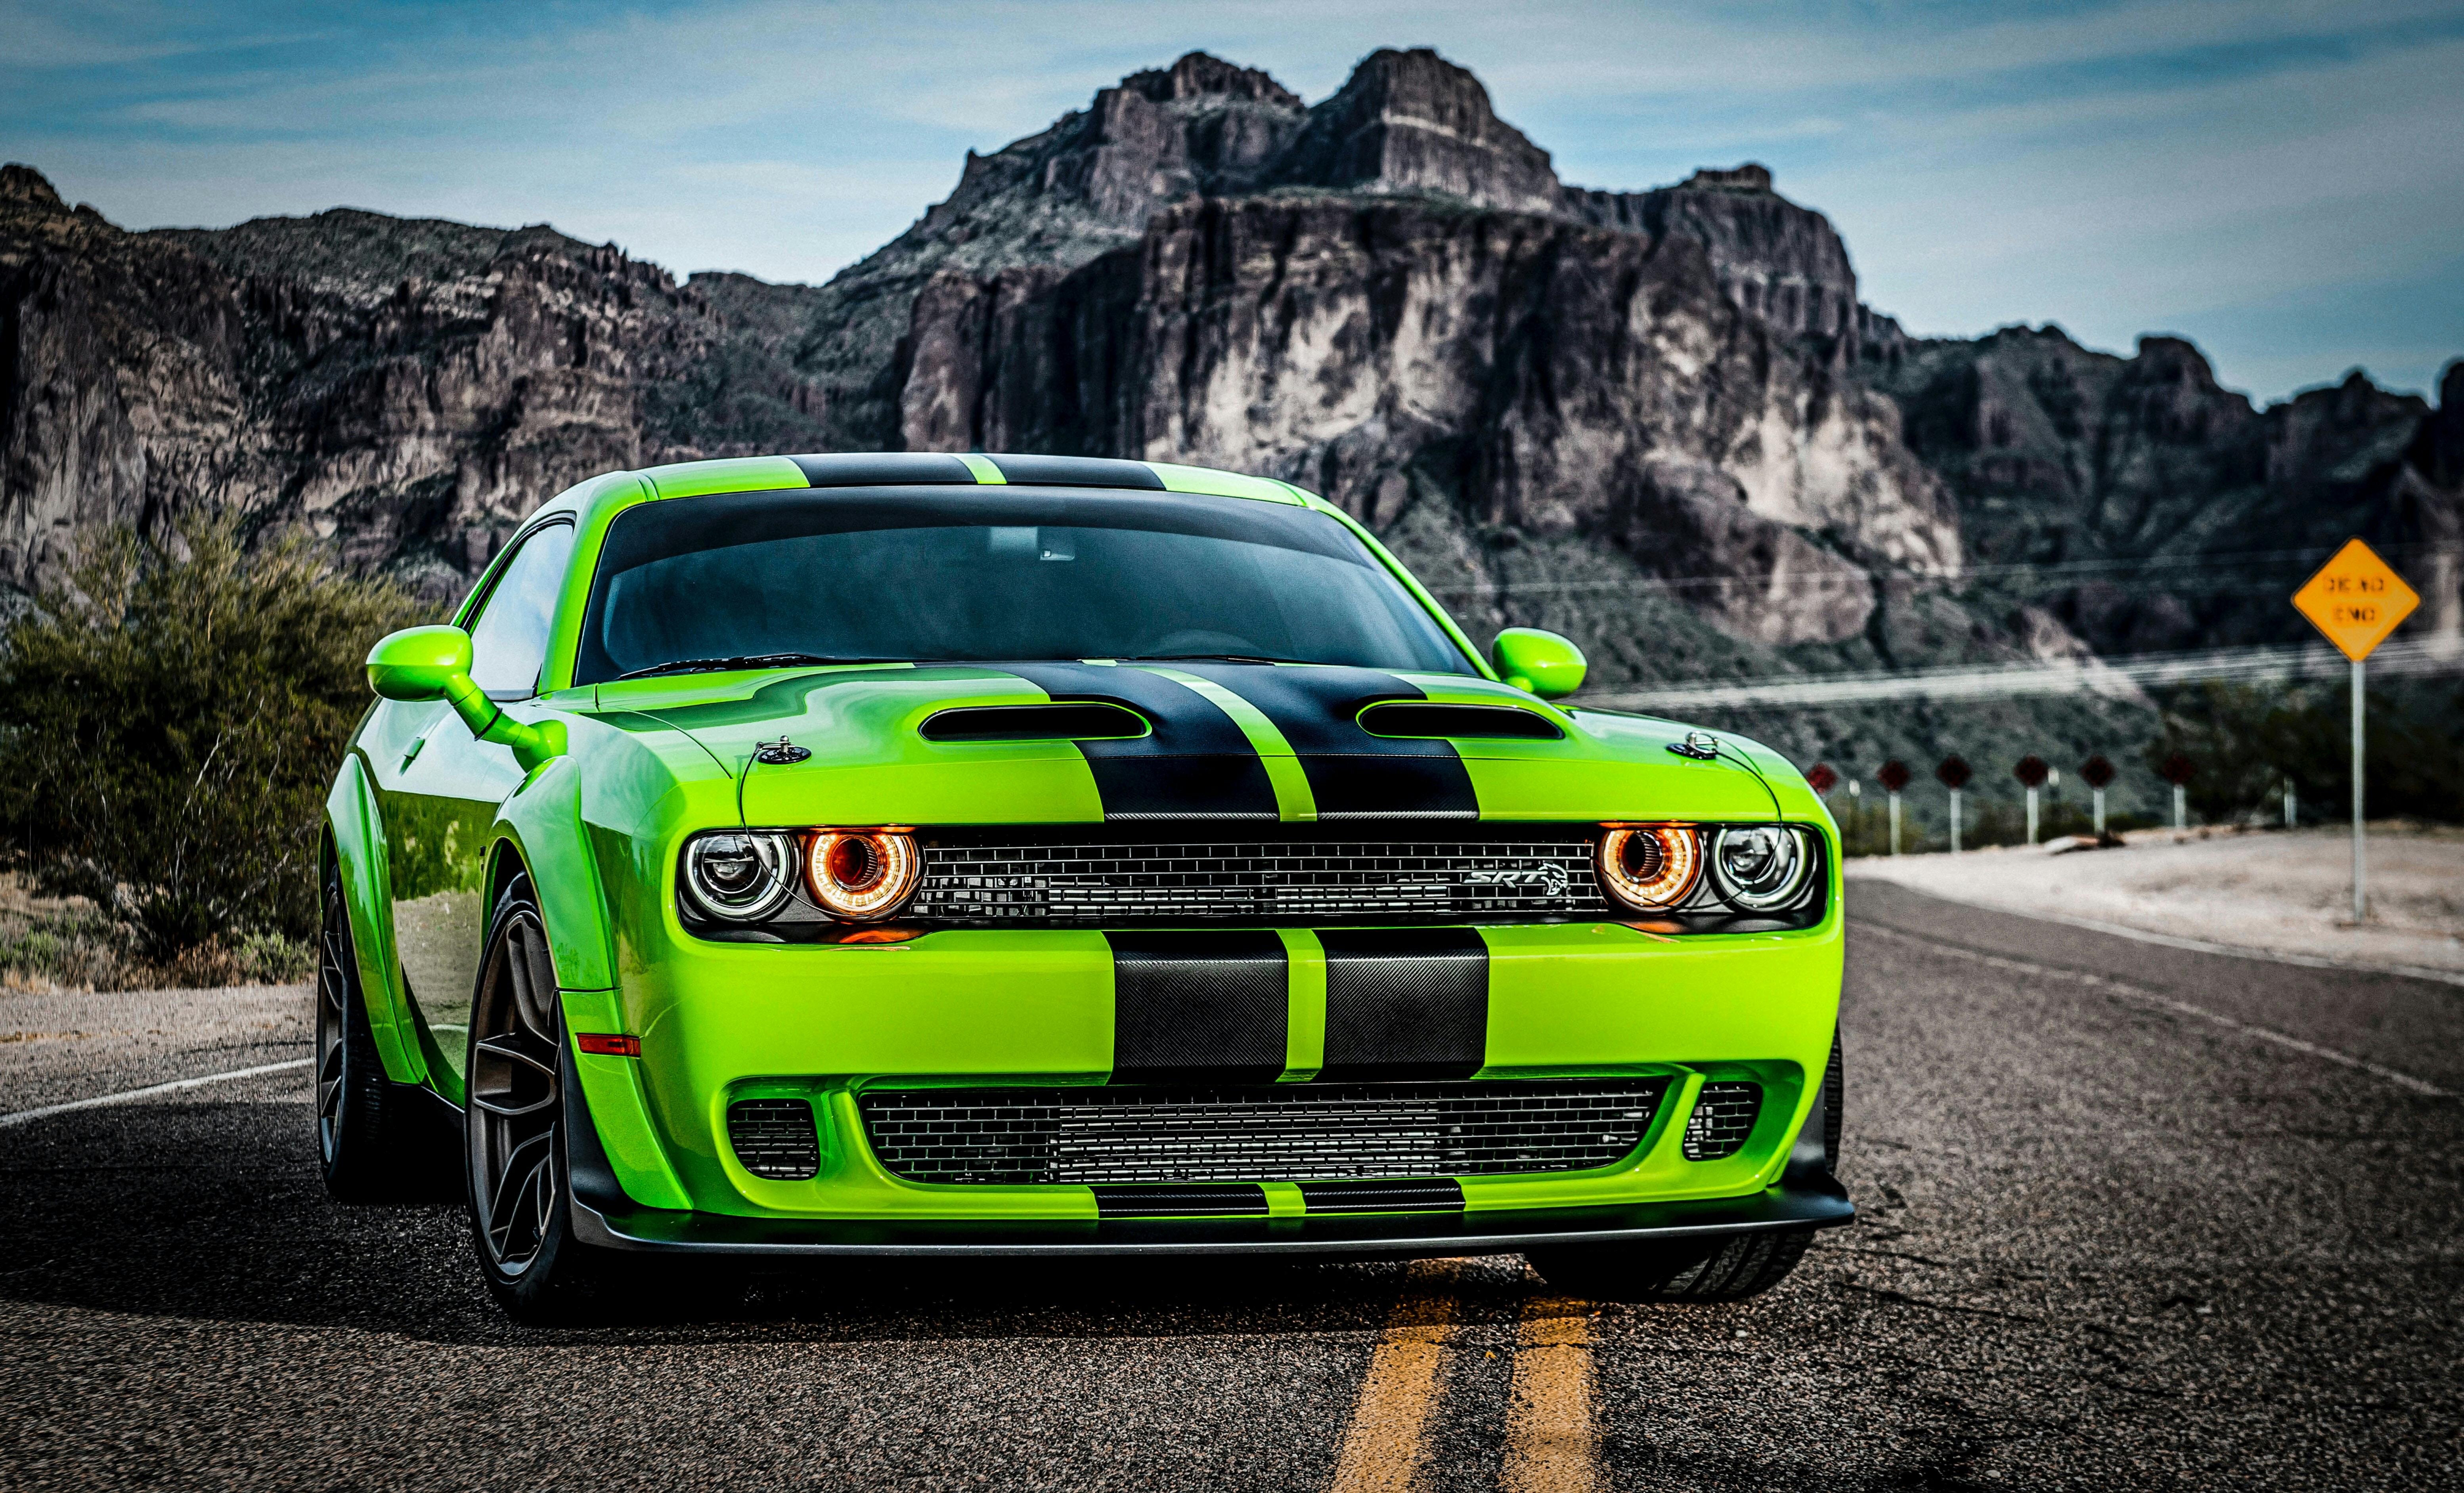 Dodge Photos, Download The BEST Free Dodge Stock Photos & HD Images